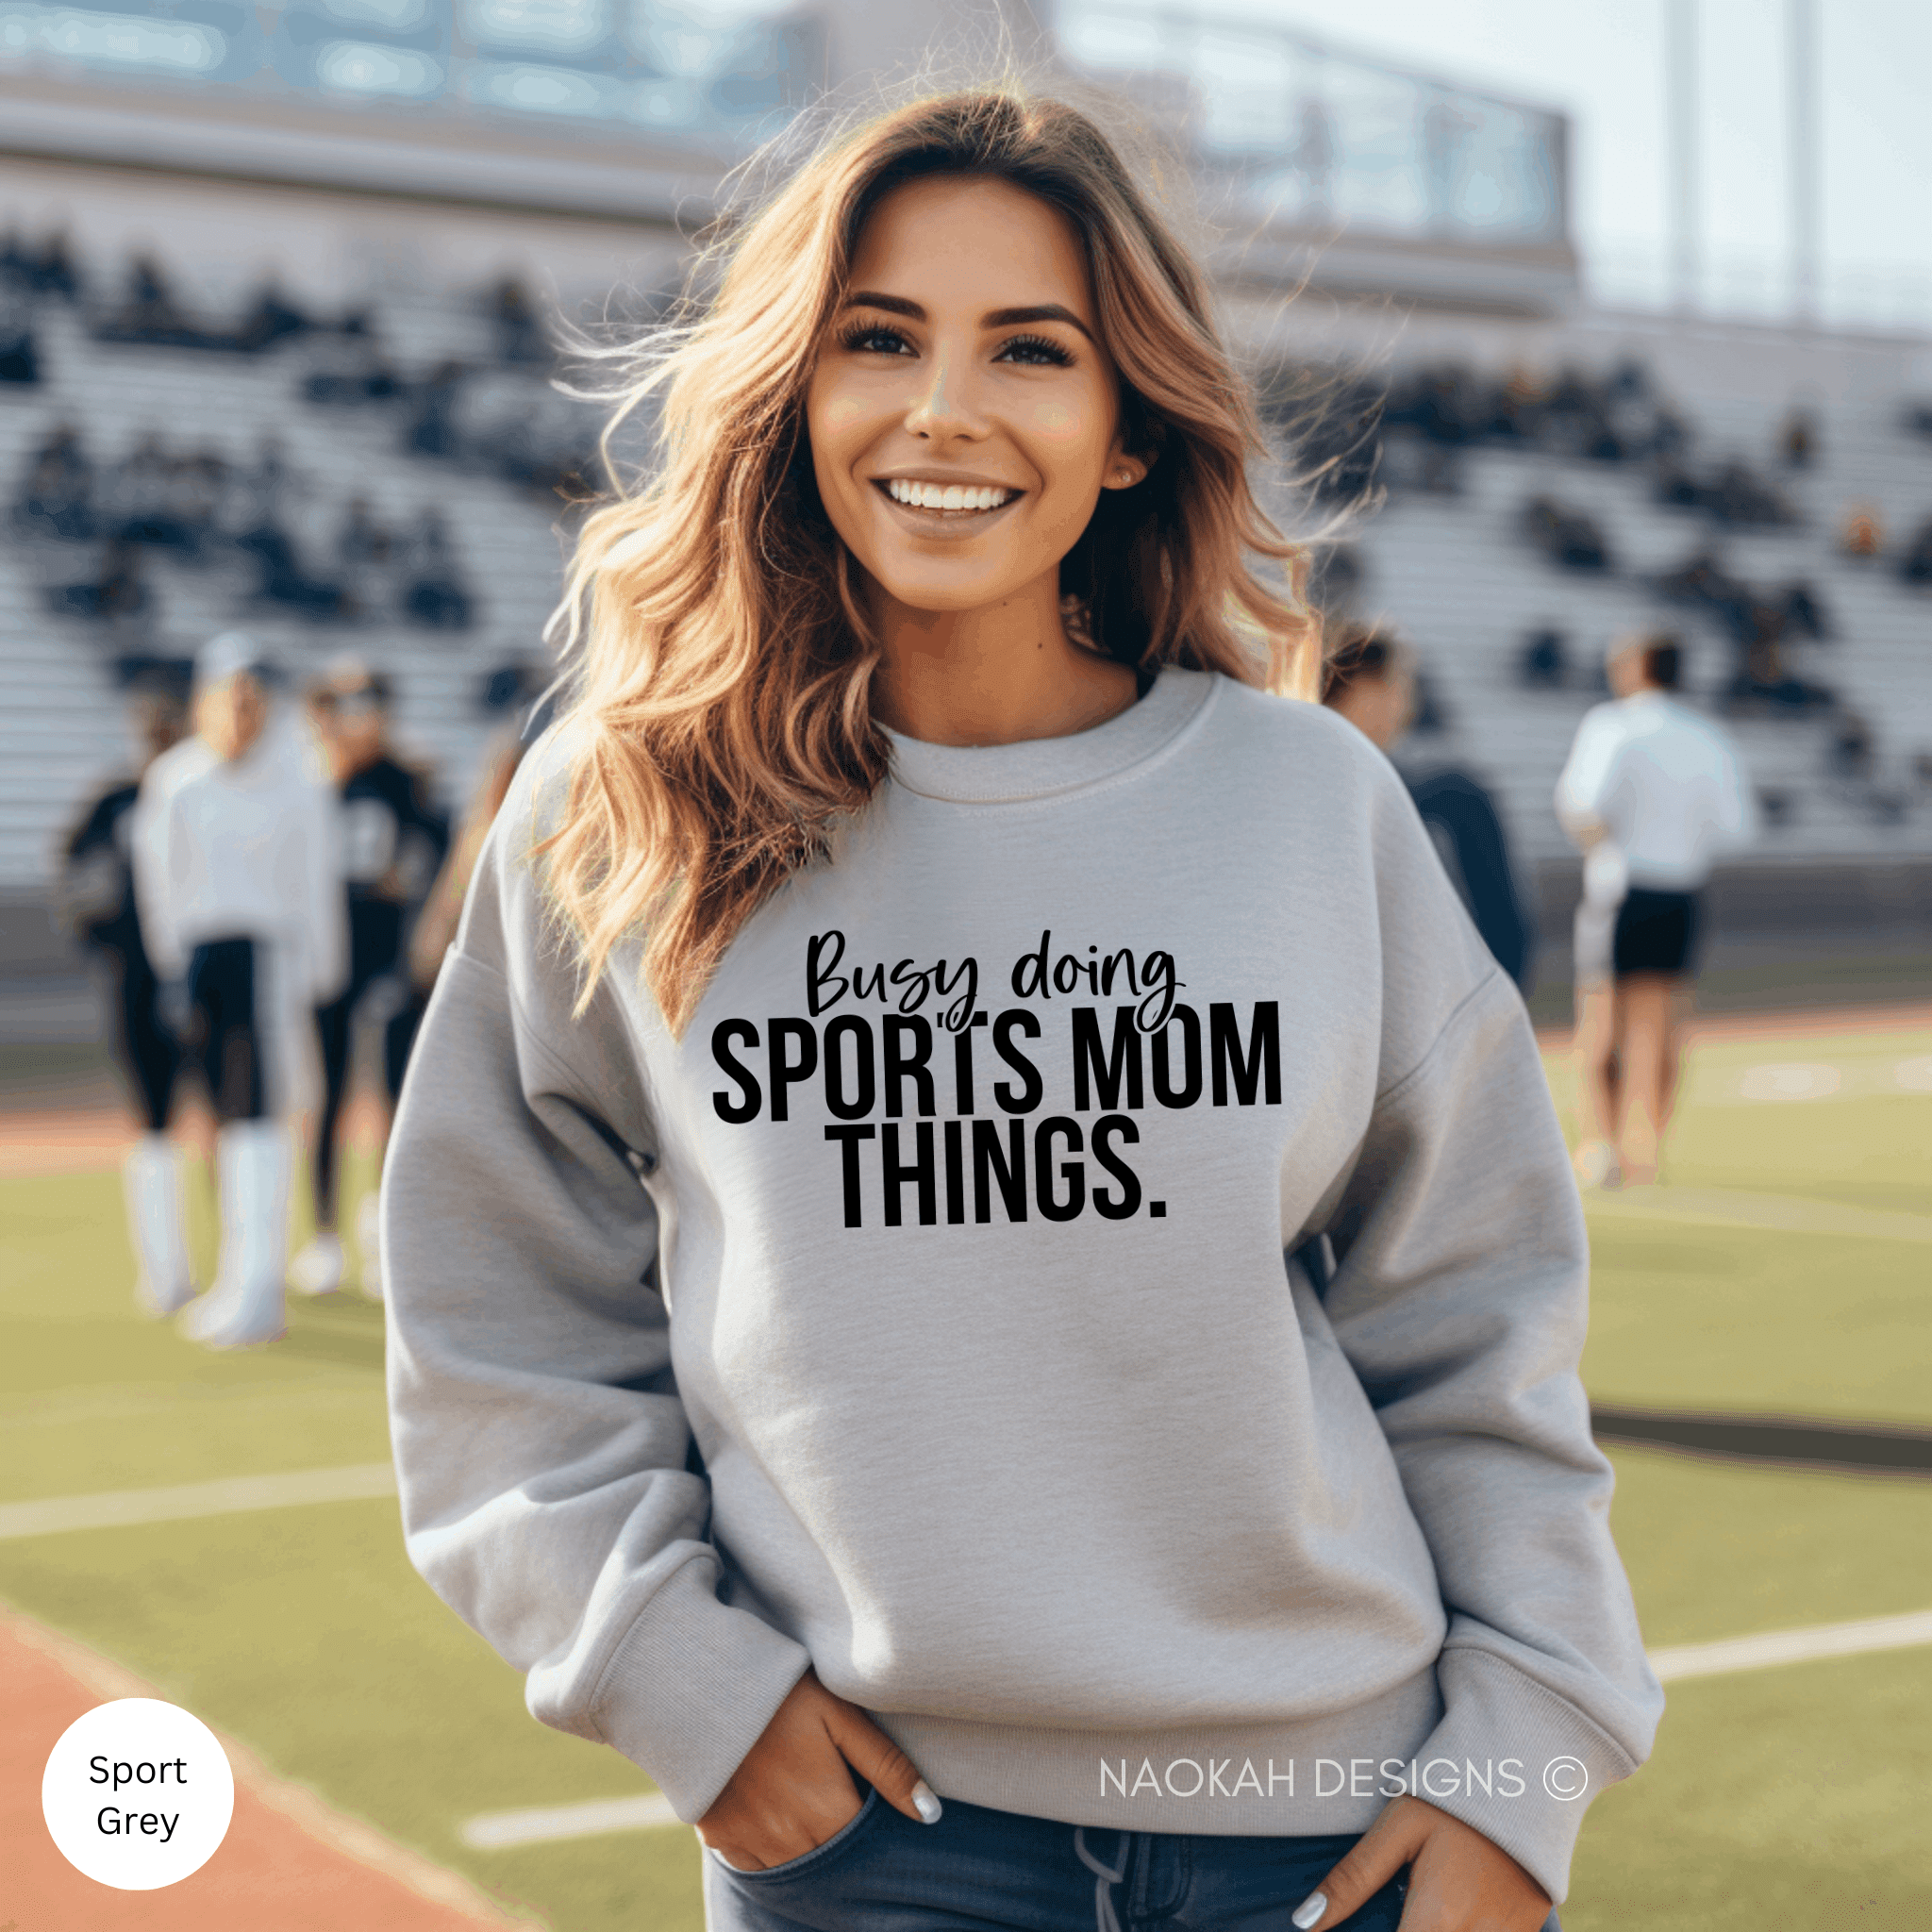 just @masseya casually rockin' our go-to mom uniform: an oversized  sweatshirt + leggings 〰️ this cool mom sweatshirt is one of our faves 🫶🏼